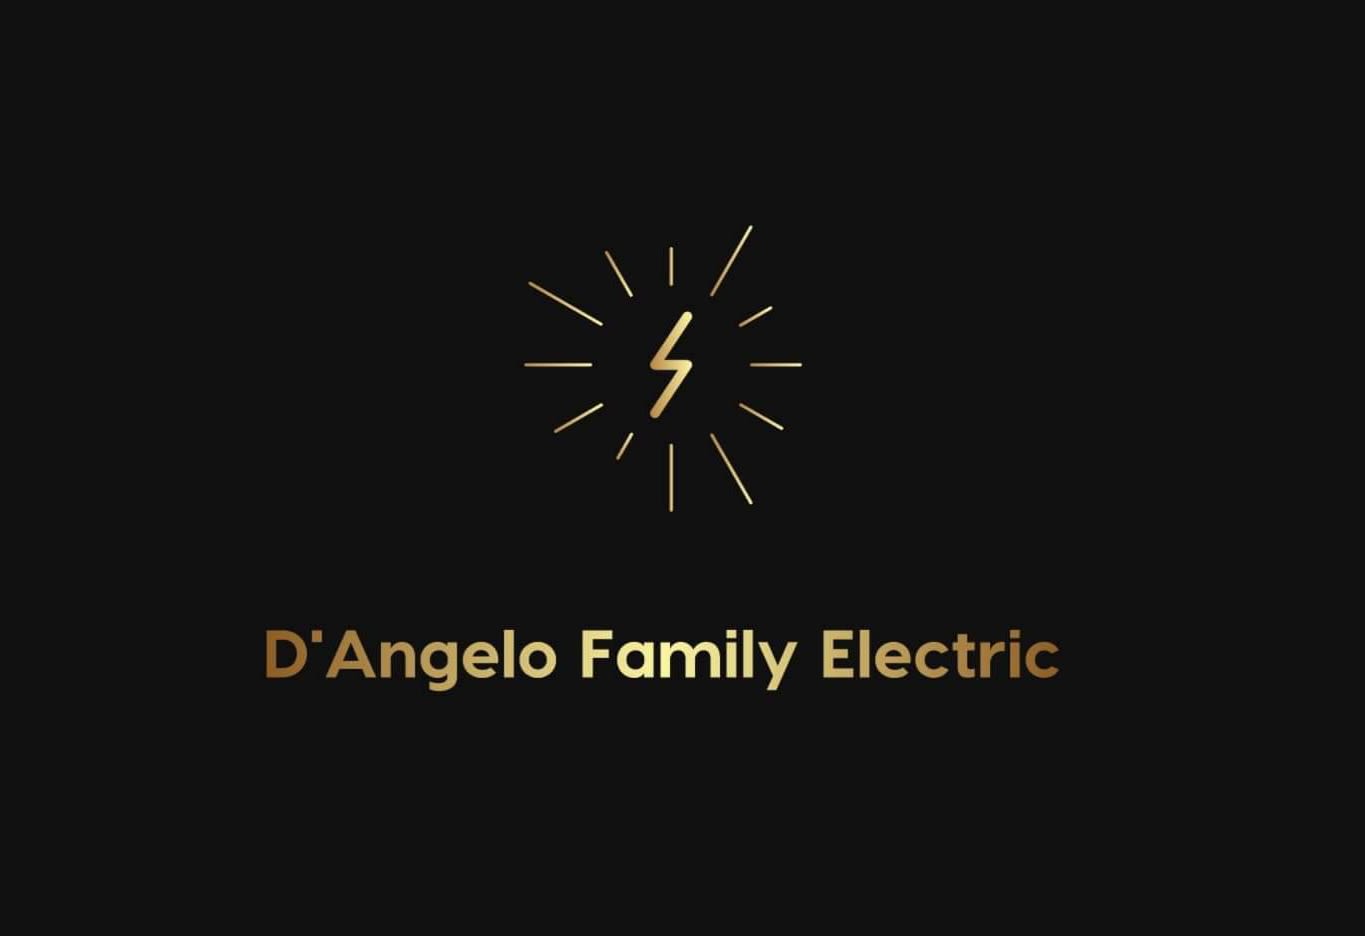 D'Angelo Family Electric